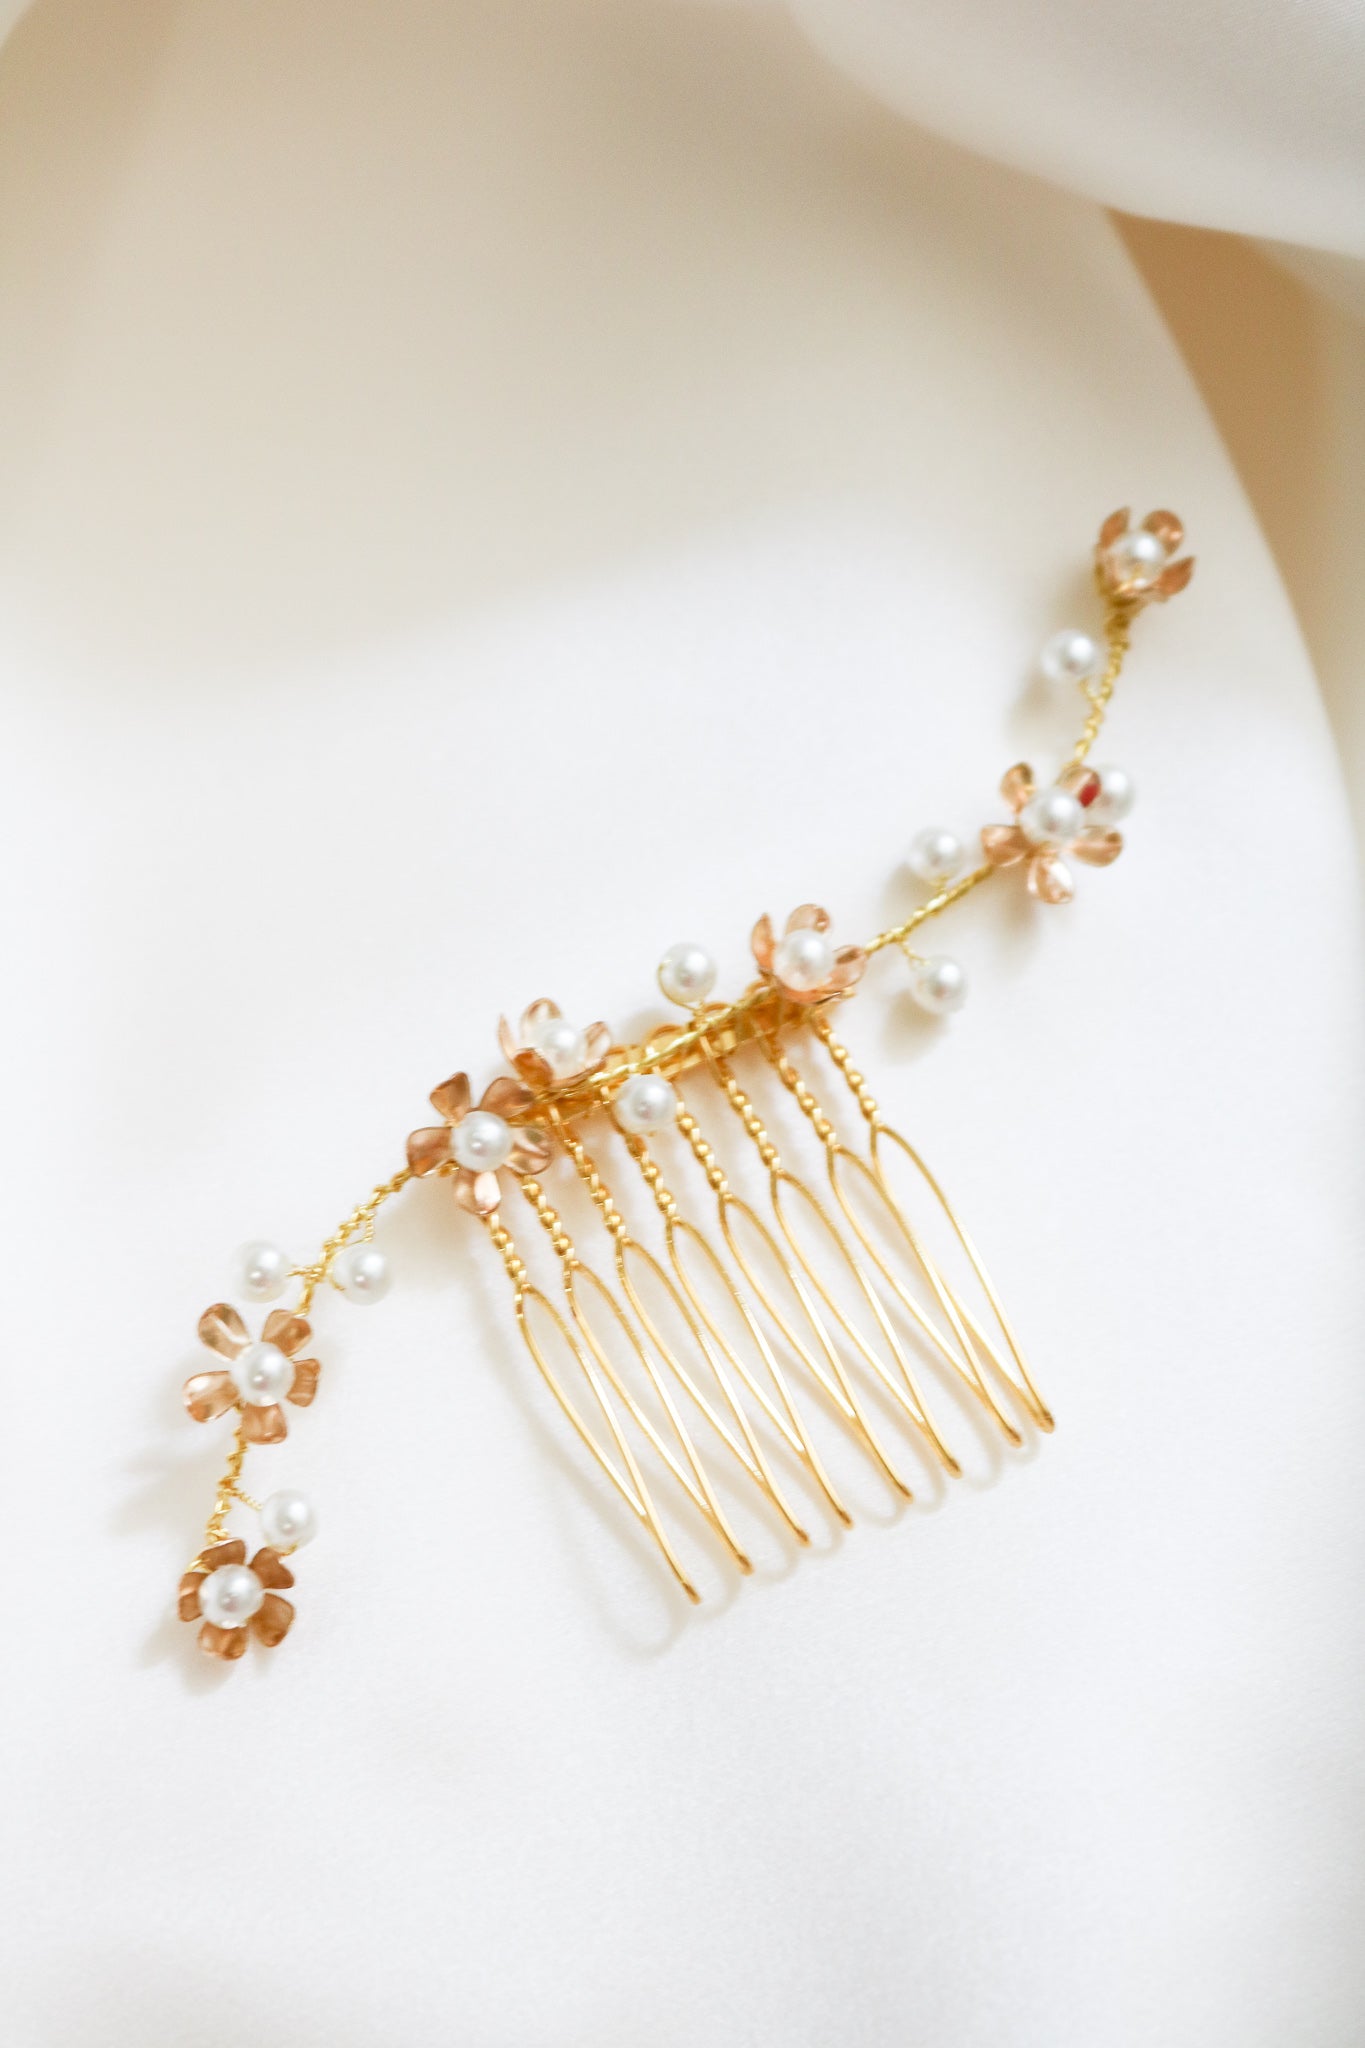 Juliette Floral and Pearl Comb No.02-0